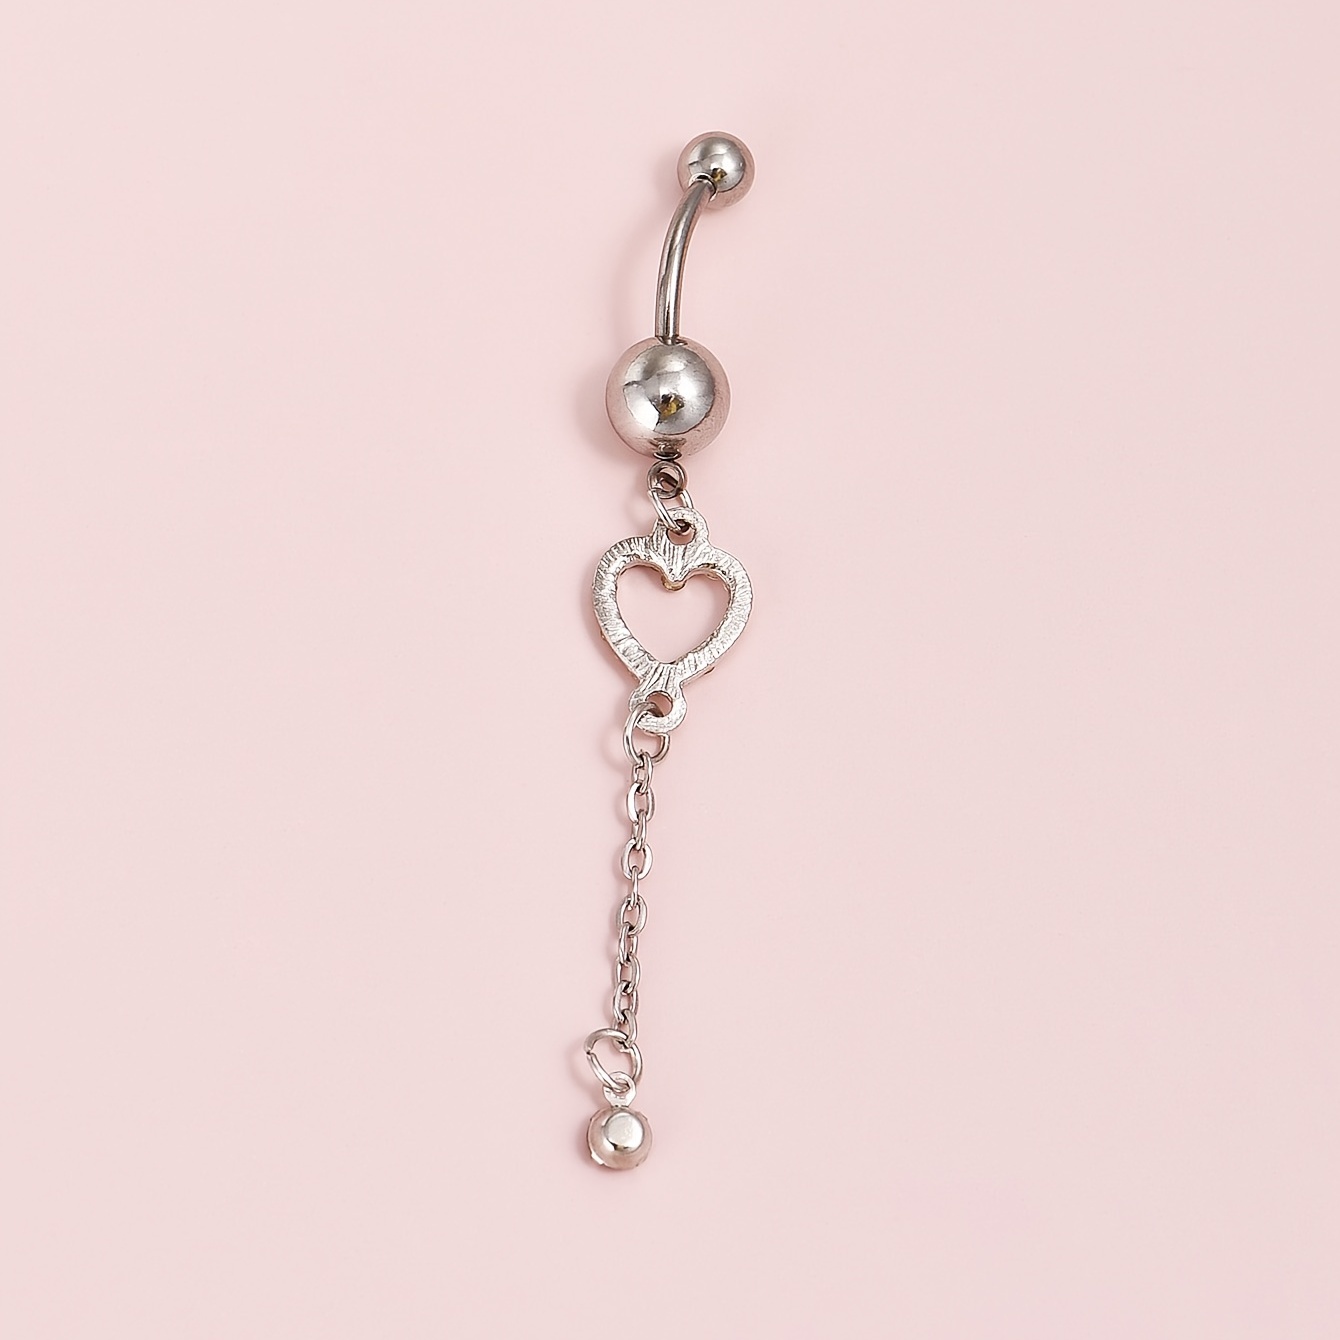 Heart Shield Belly Button Ring Belly Button Rings & Bars — Belly Bling